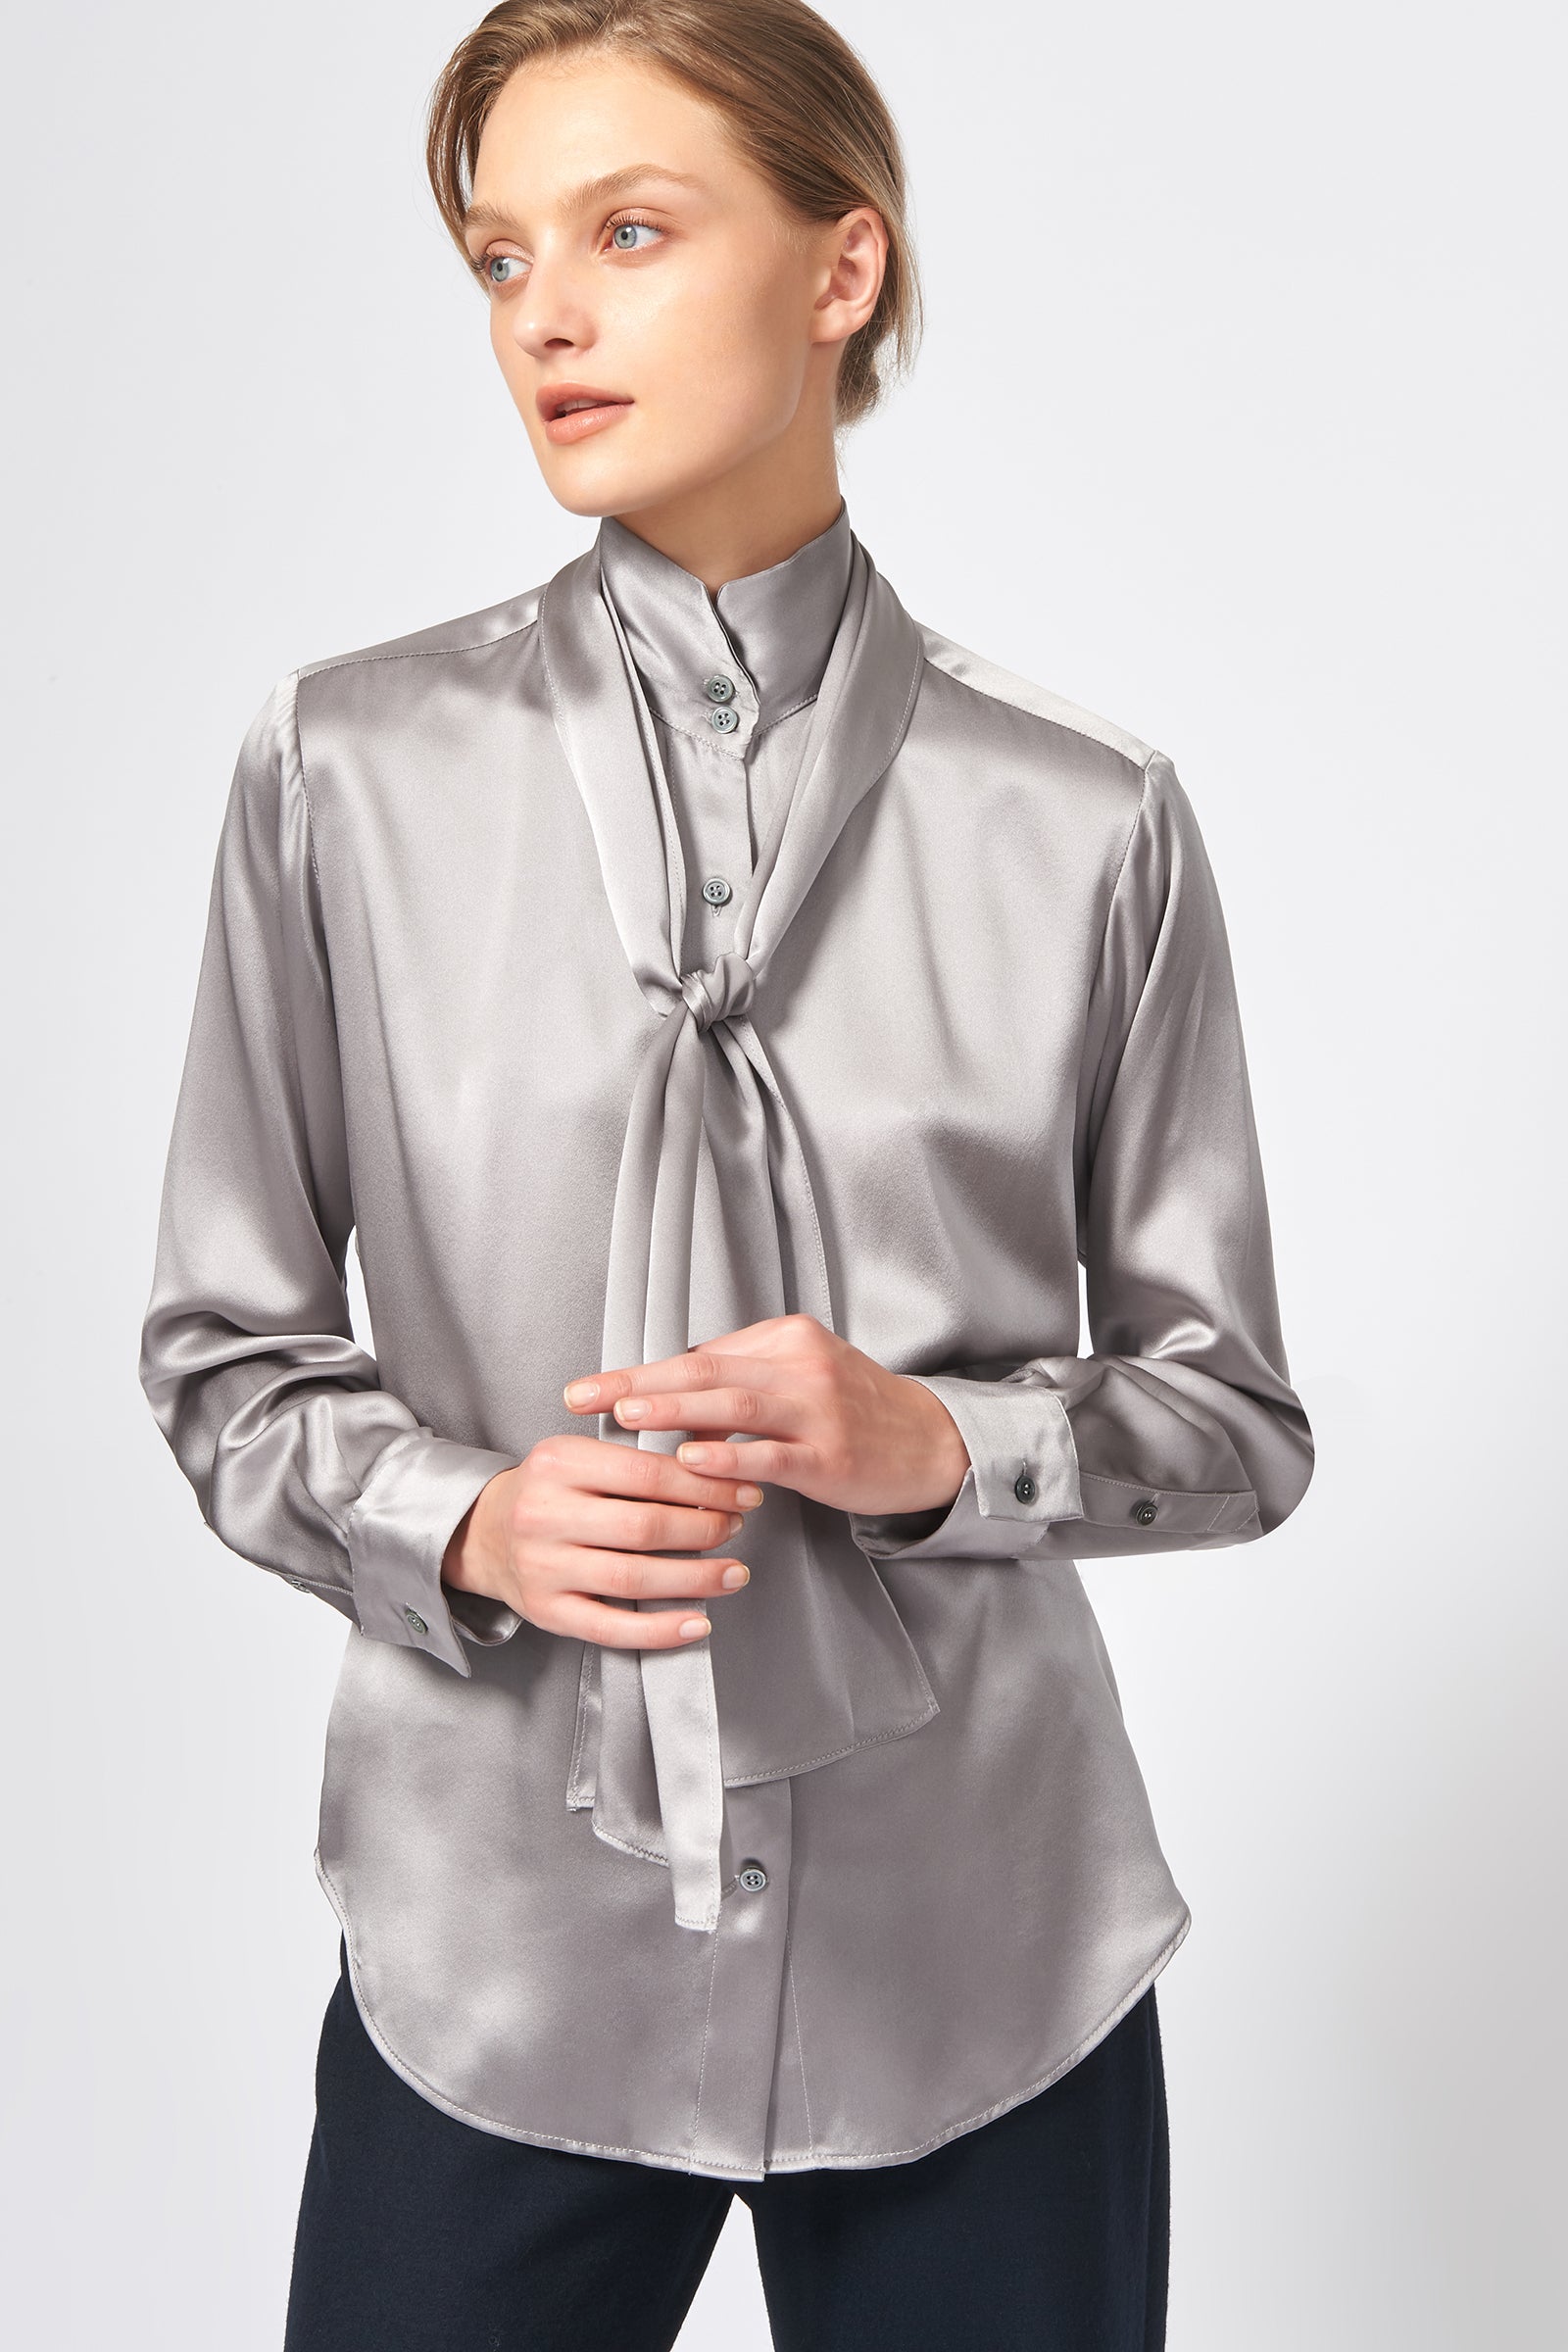 Kal Rieman Scarf Tie Blouse in Silver on Model Front View